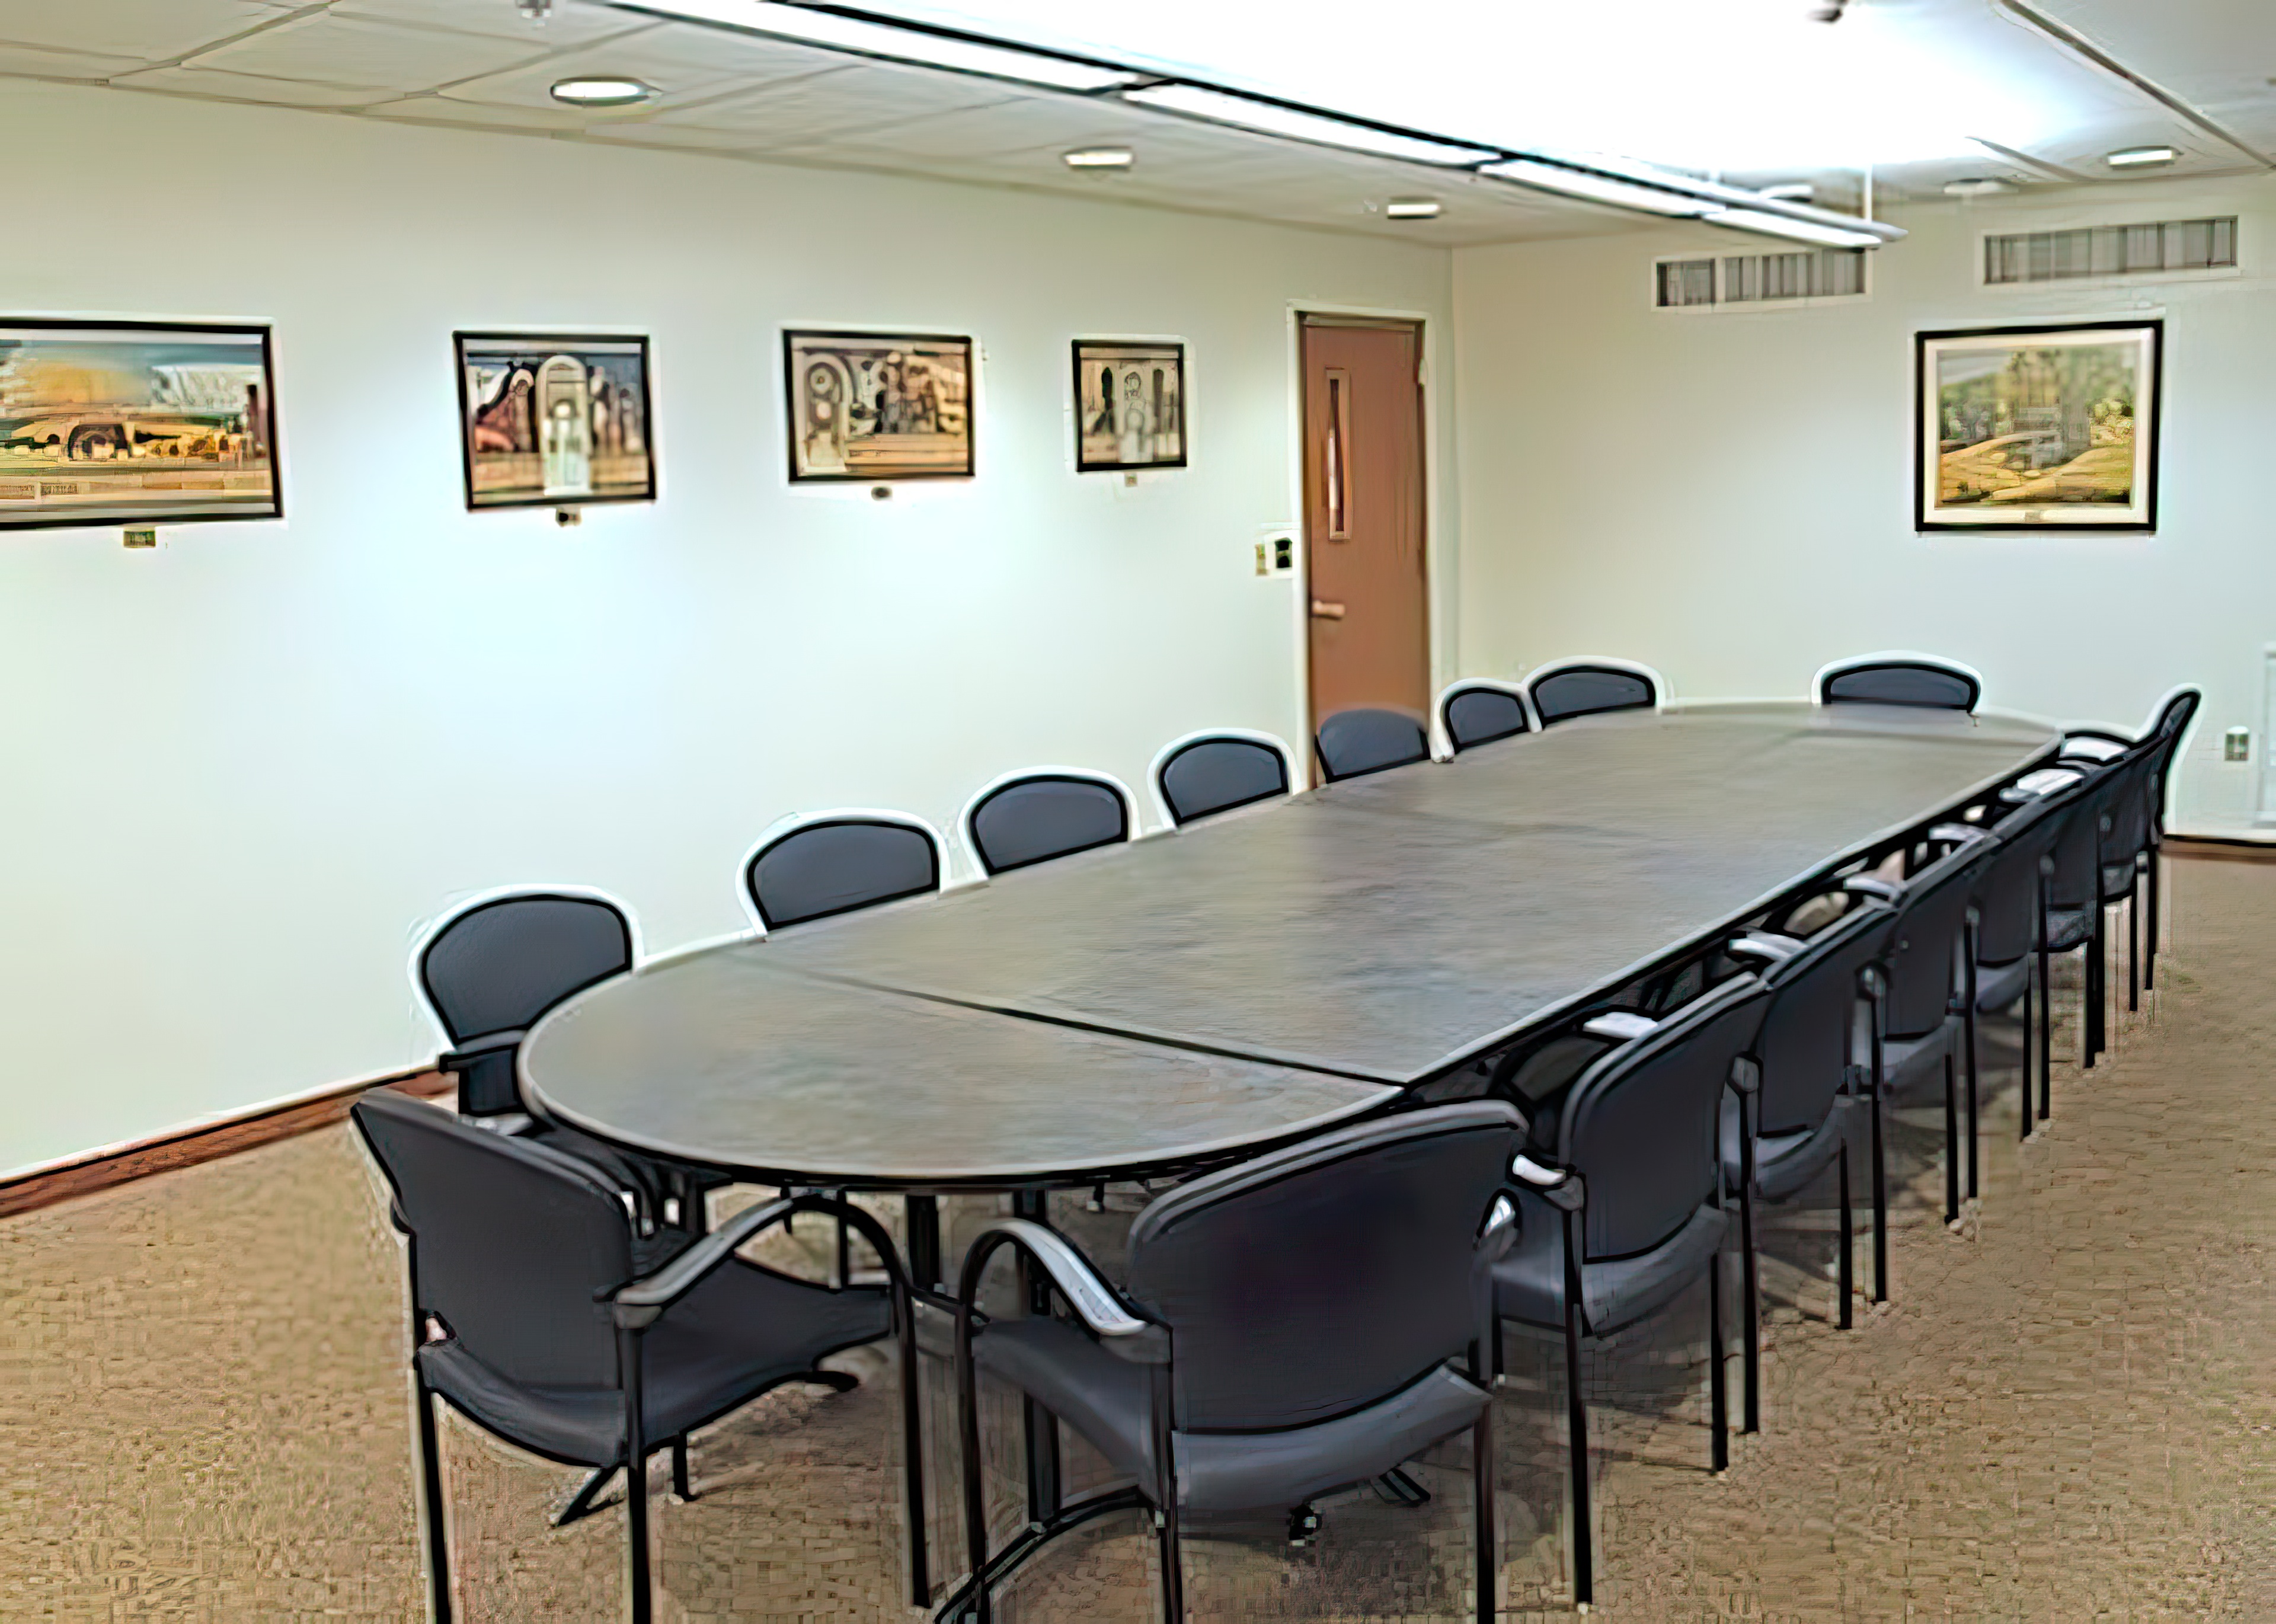 Chairs surround a large, pill-shaped table. Small paintings adorn the walls.